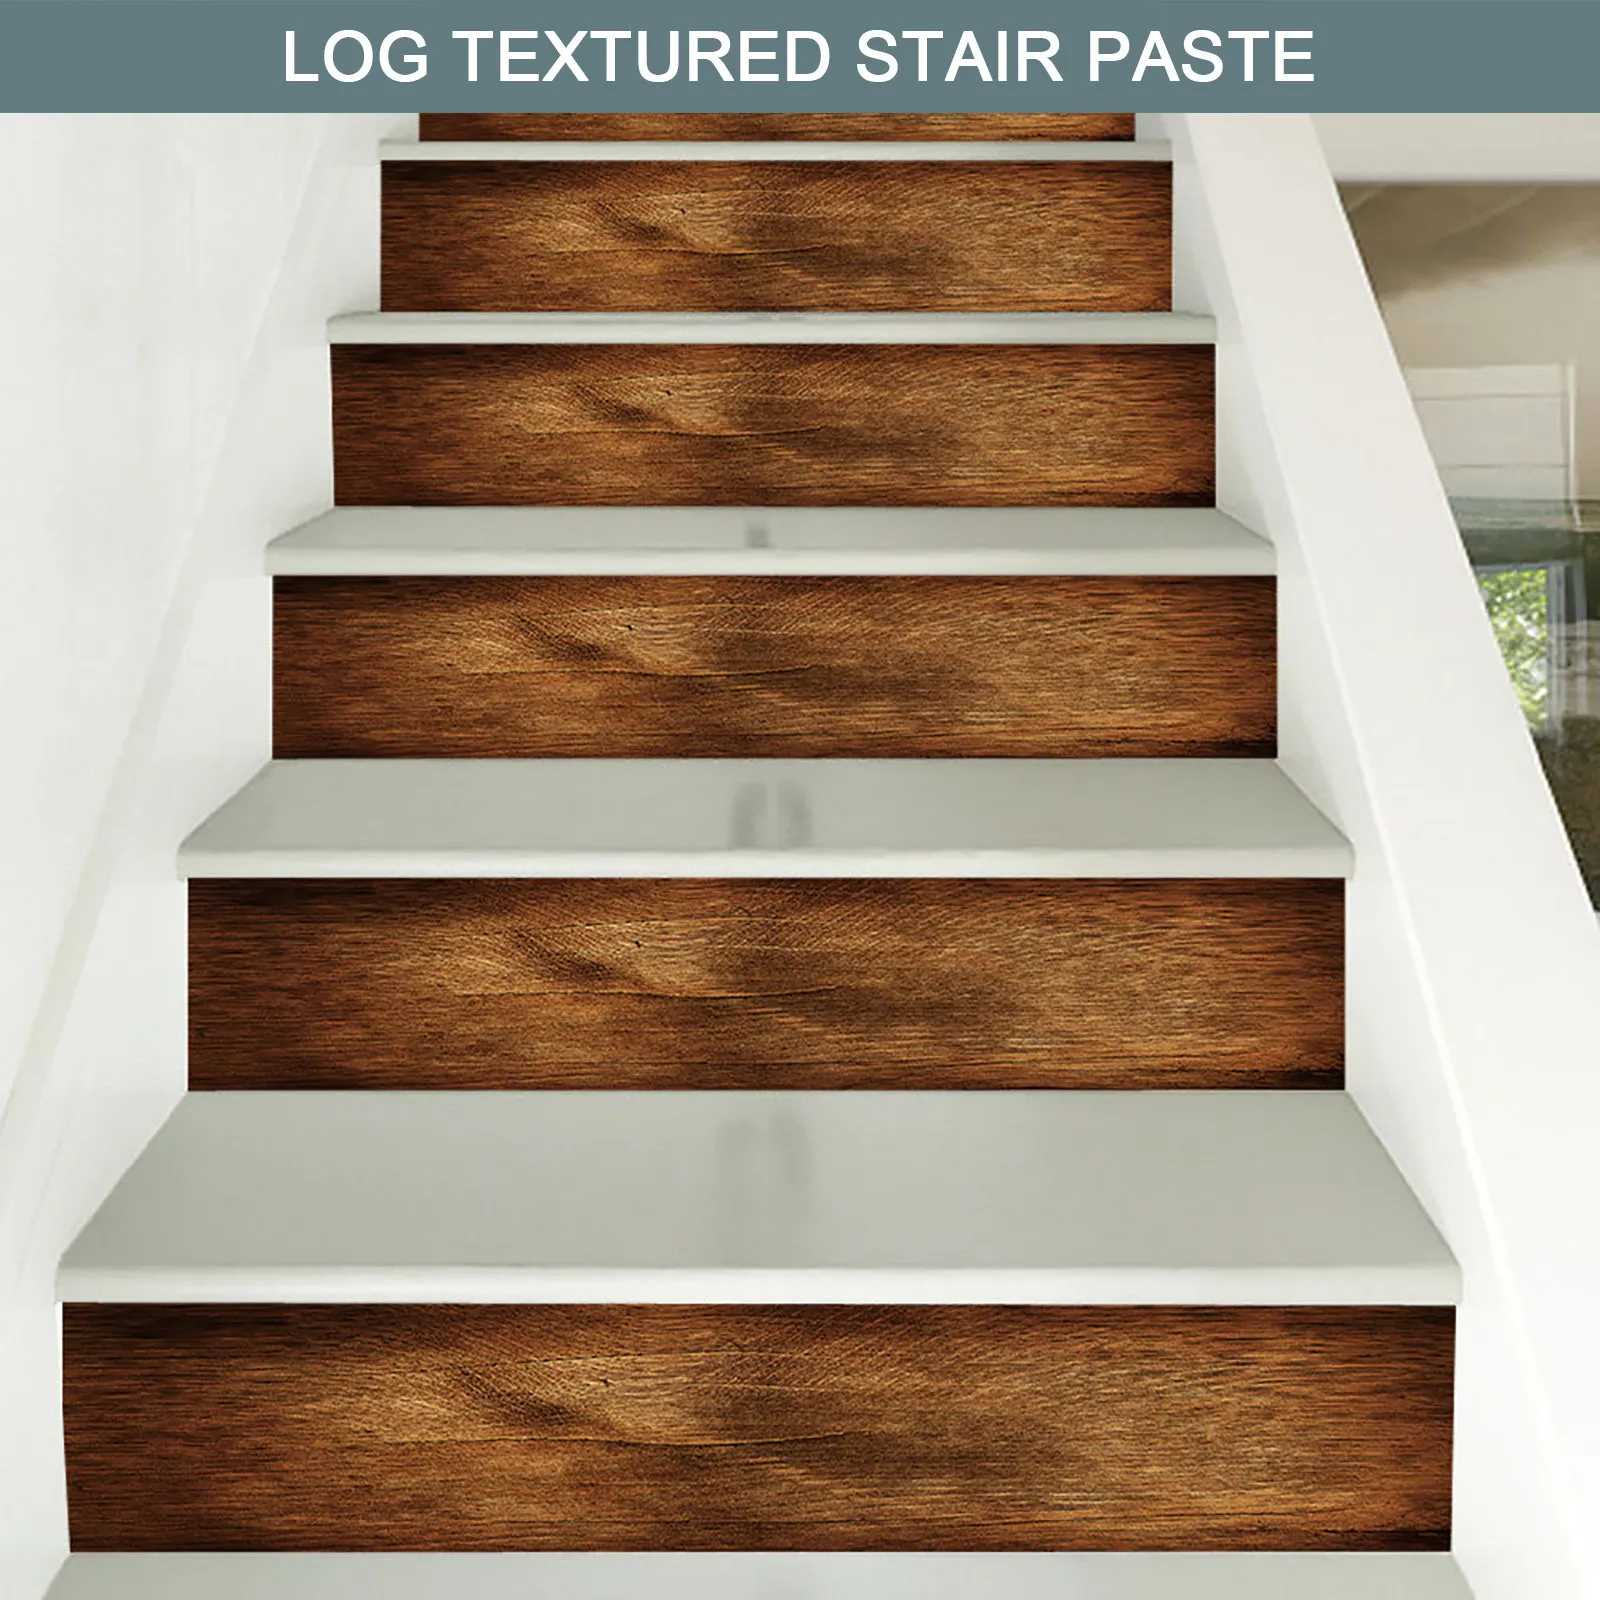 

18x100cm 6pcs Stair Sticker Simulation Wood Grain Waterproof Self-adhesive PVC Staircase Sticker for Bathroom Kitchen Stair #GM